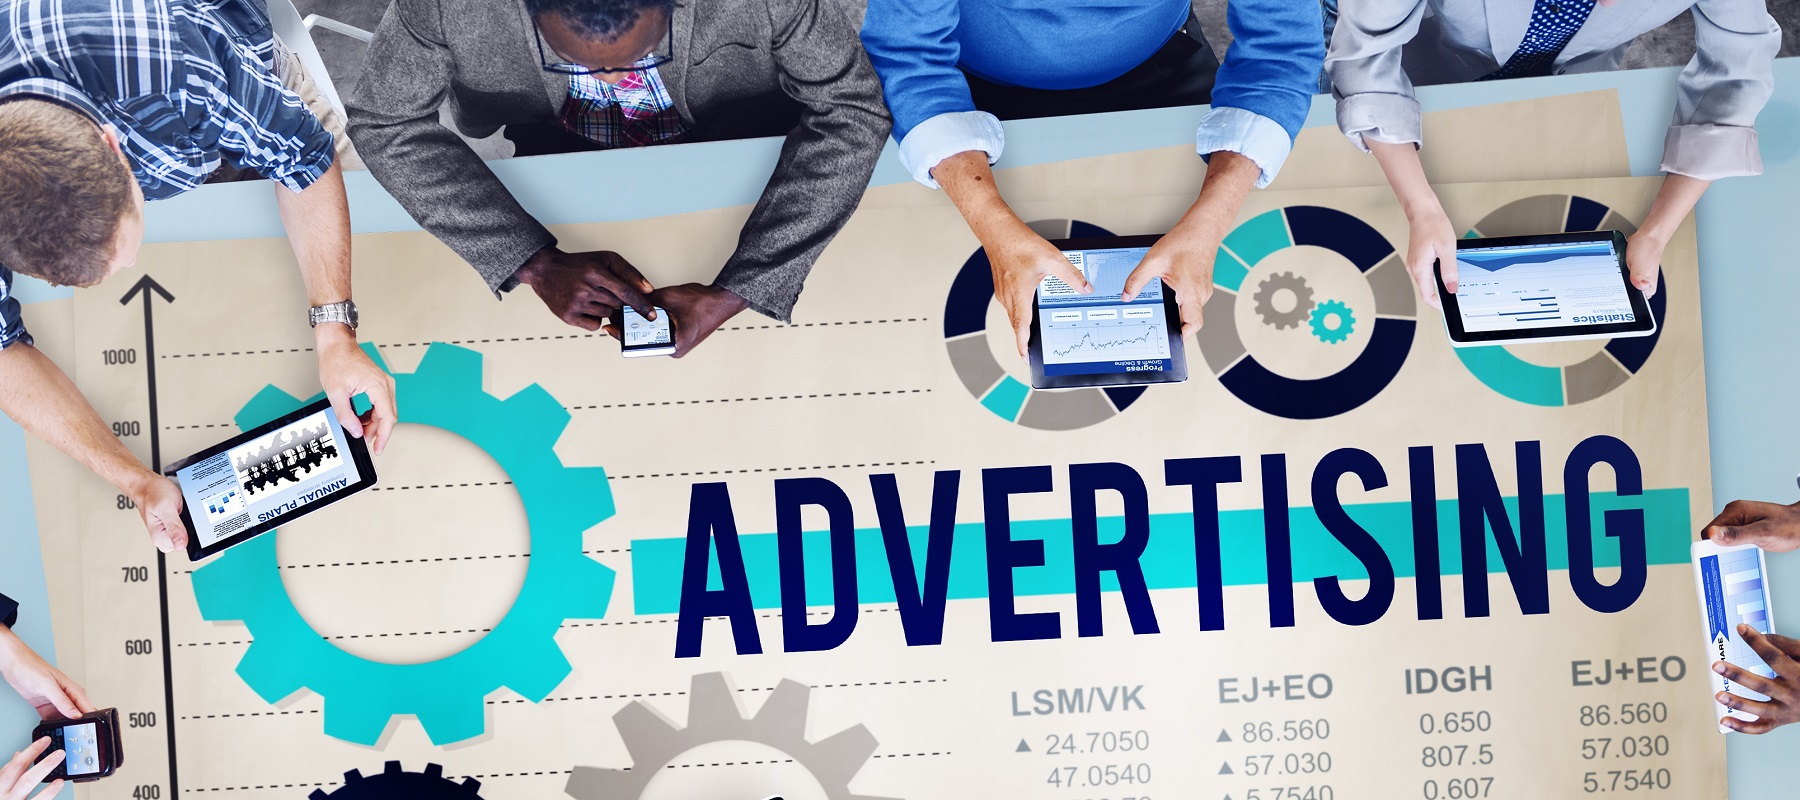 Advertising investment to grow by 3 per cent in 2023, report